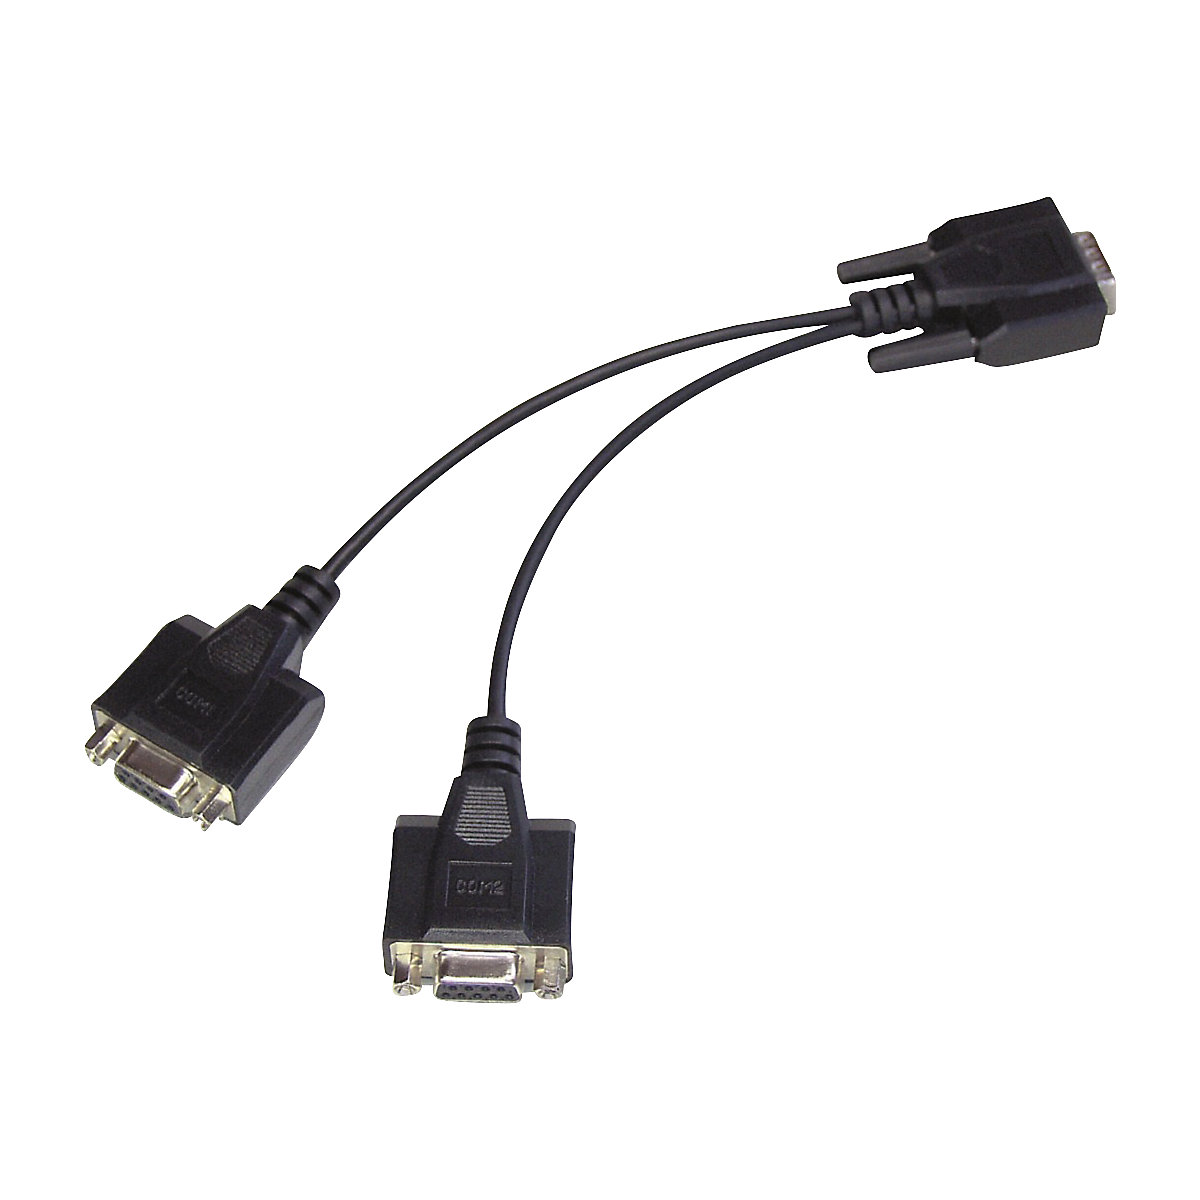 Y interface cable - KERN